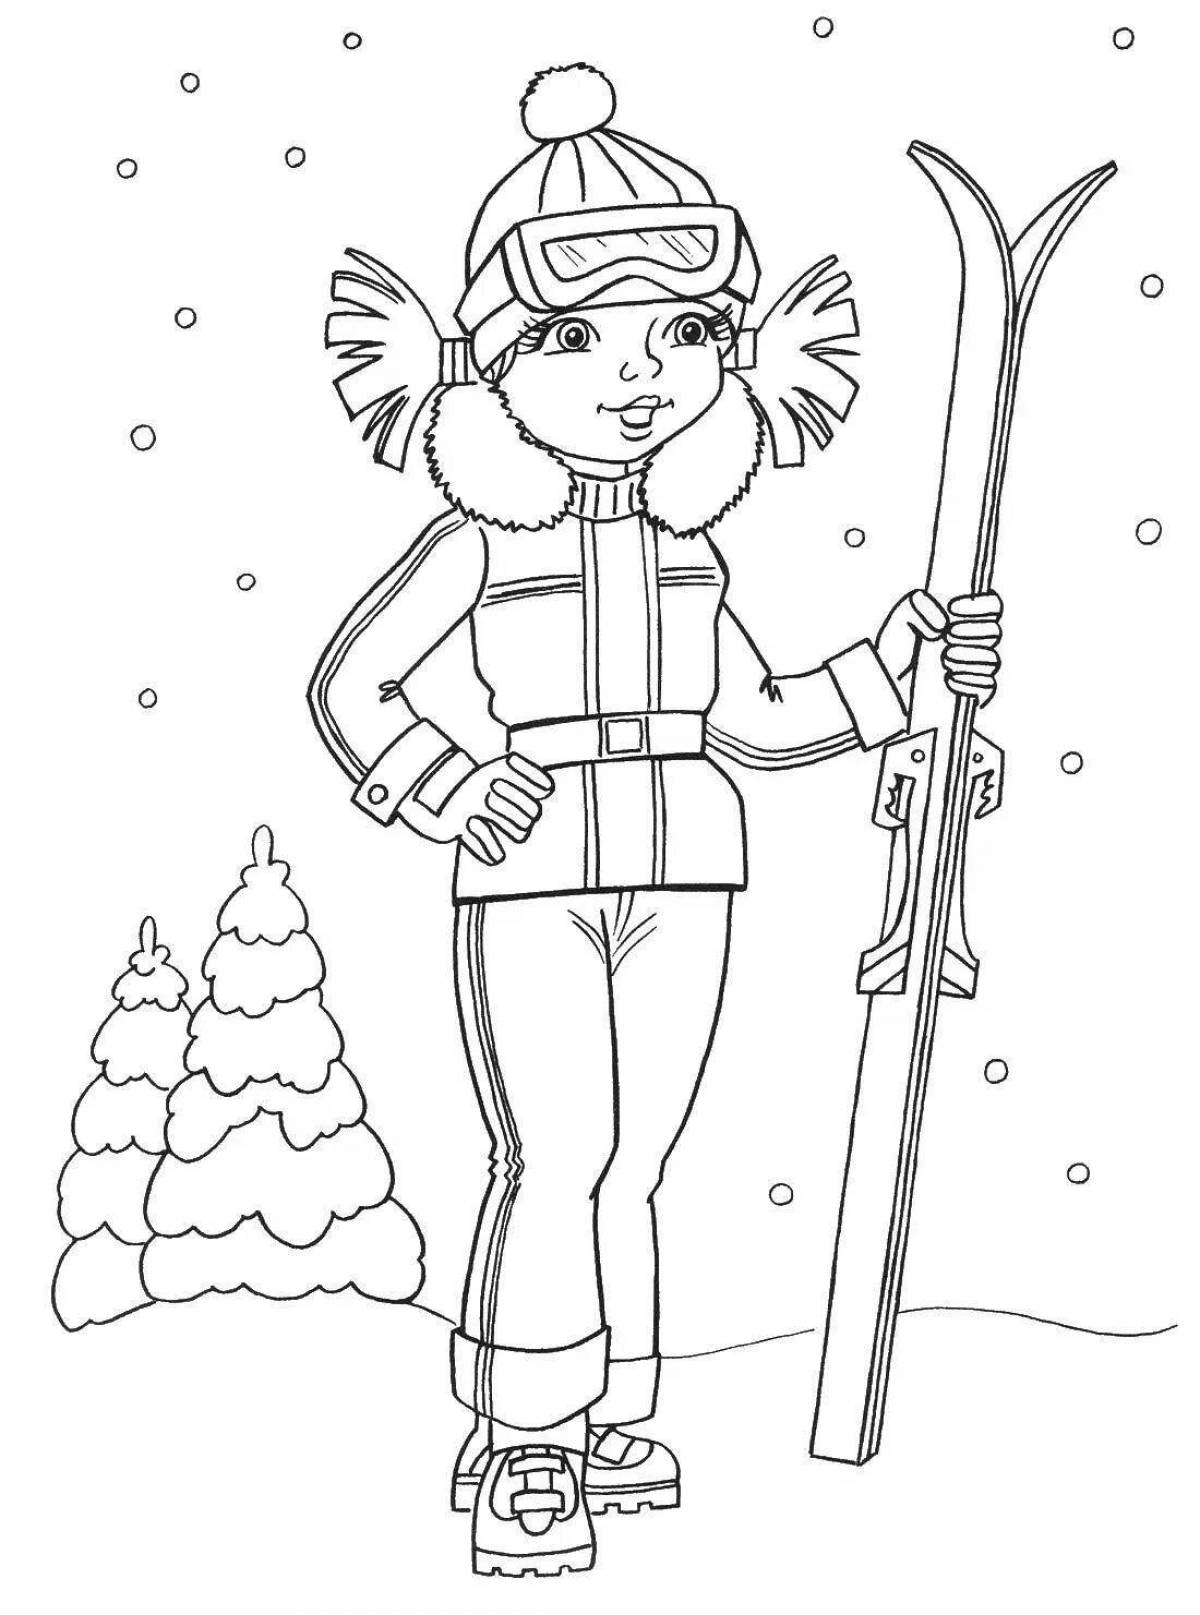 Adorable skier coloring book for kids